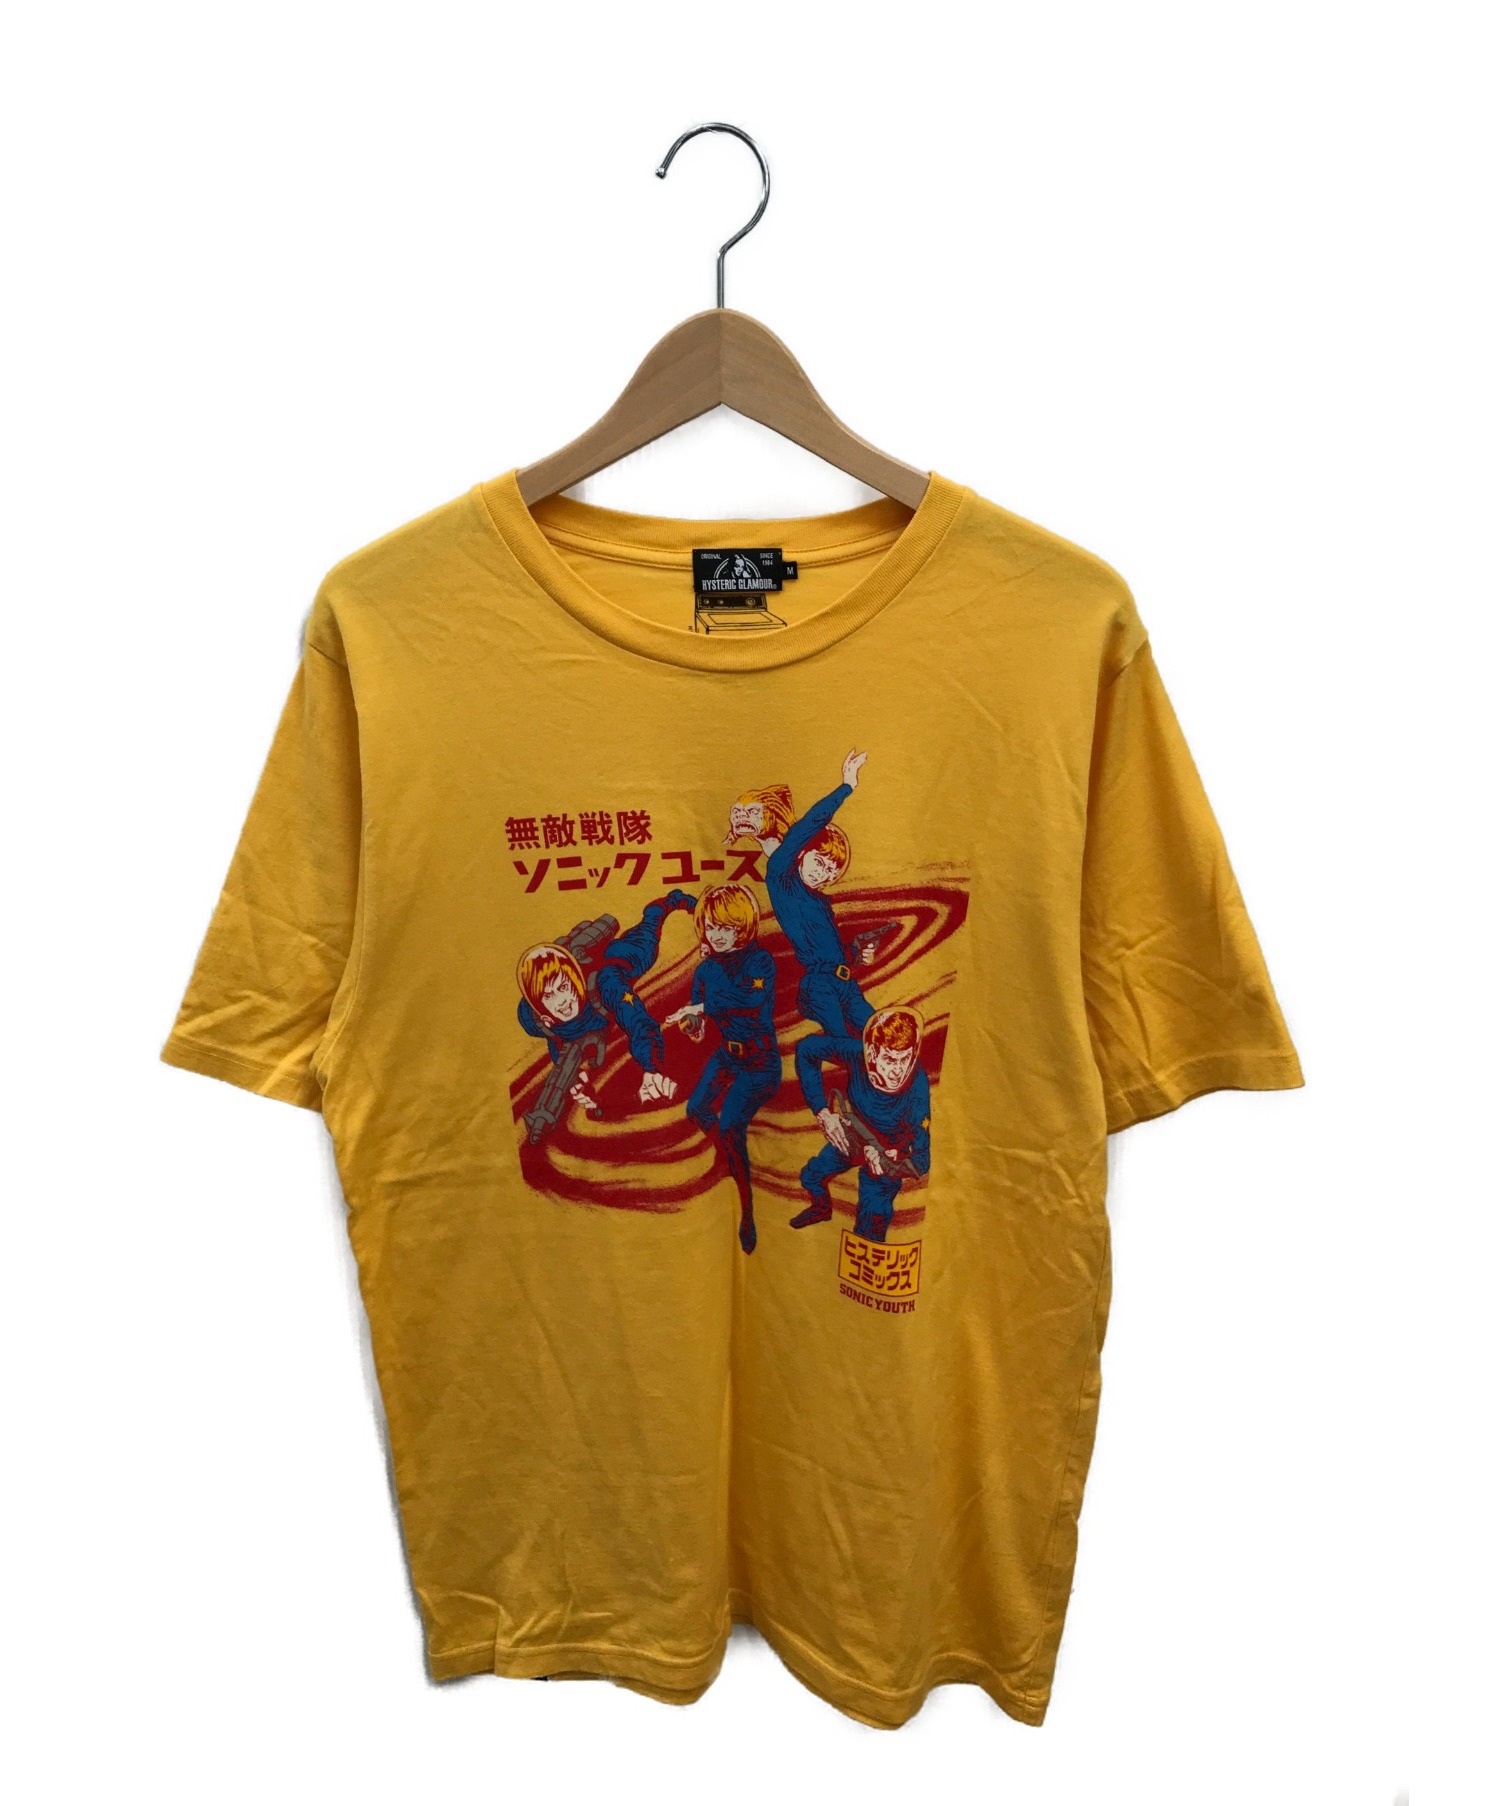 Hysteric Glamour × SONIC YOUTH (ヒステリックグラマ×ソニック・ユース) HYSTERIC COMICS Tシャツ  イエロー サイズ:M 02201CT29